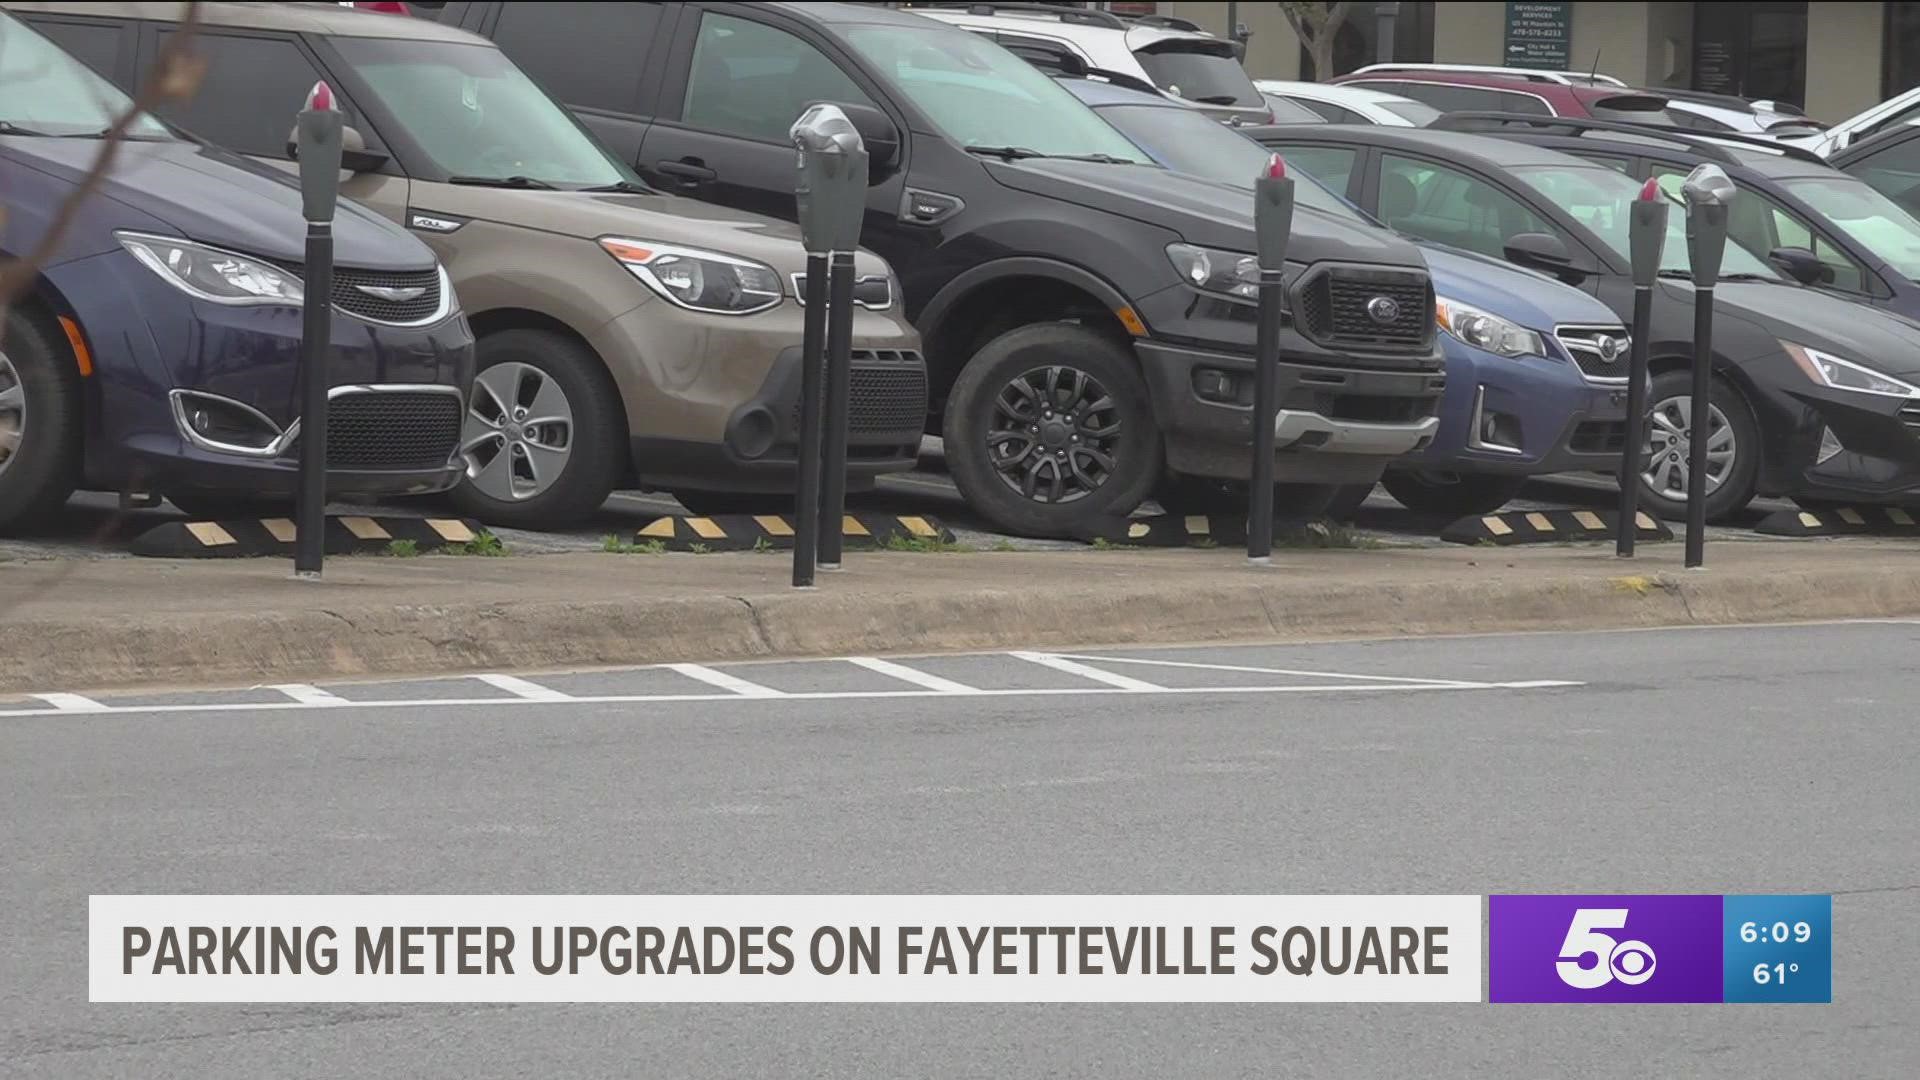 Fayetteville's new parking meters have new features like car detecting sensors, accept almost all forms of payment and offer free parking for less than 15 minutes.